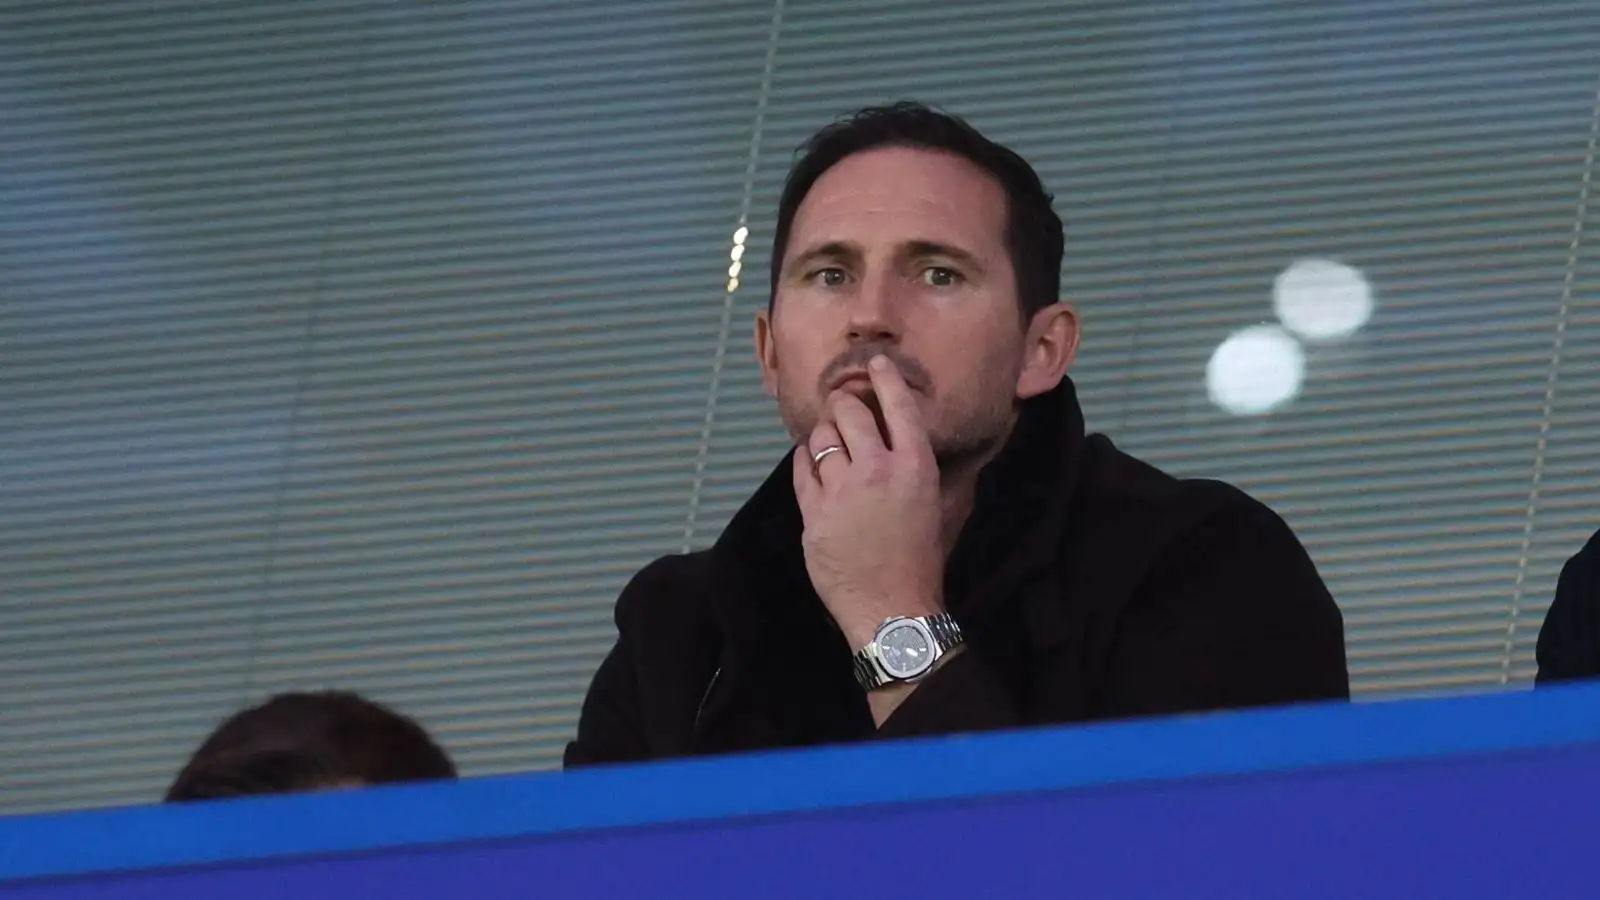 Chelsea boss Frank Lampard watches his former side